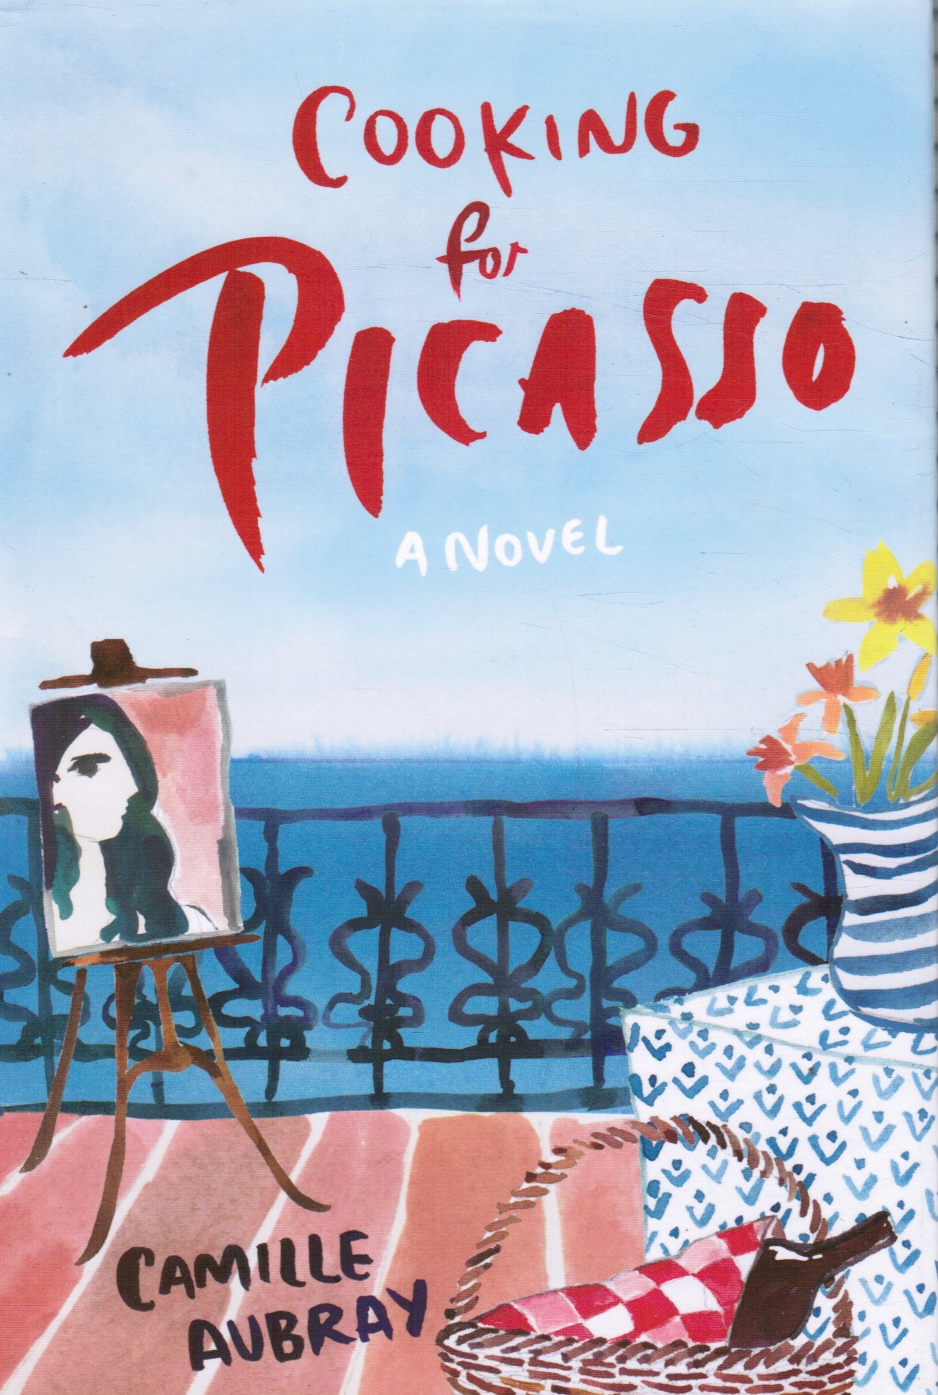 AUBRAY, CAMILLE - Cooking for Picasso: A Novel